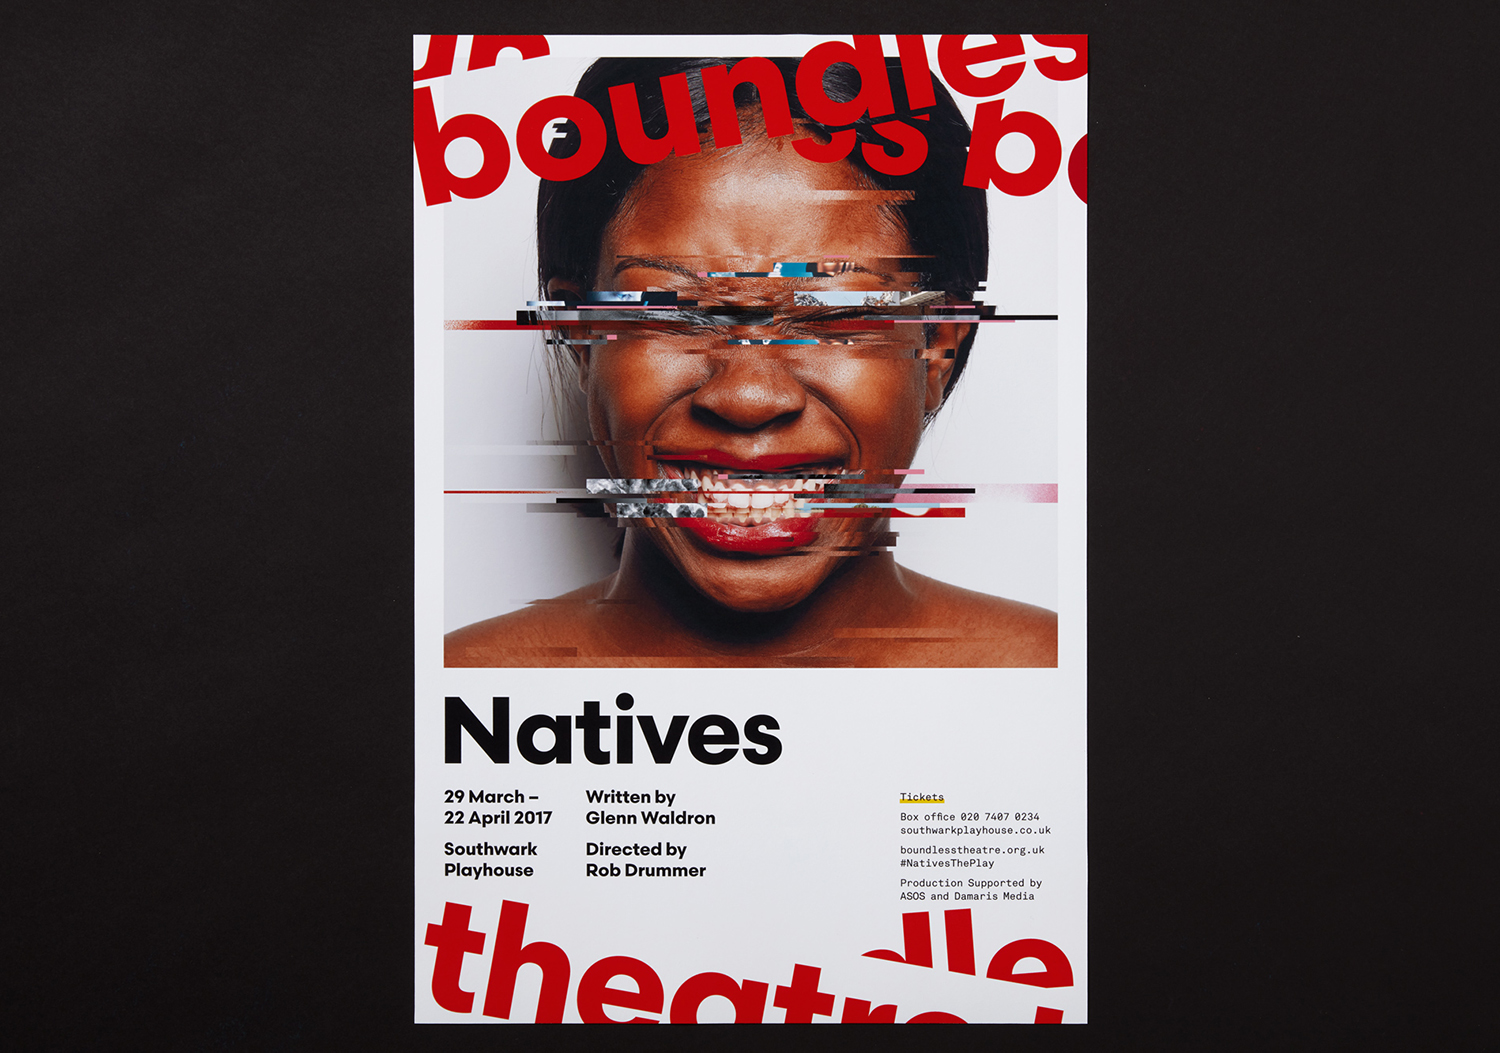 Poster Design Inspiration – Boundless Theatre by Spy, United Kingdom